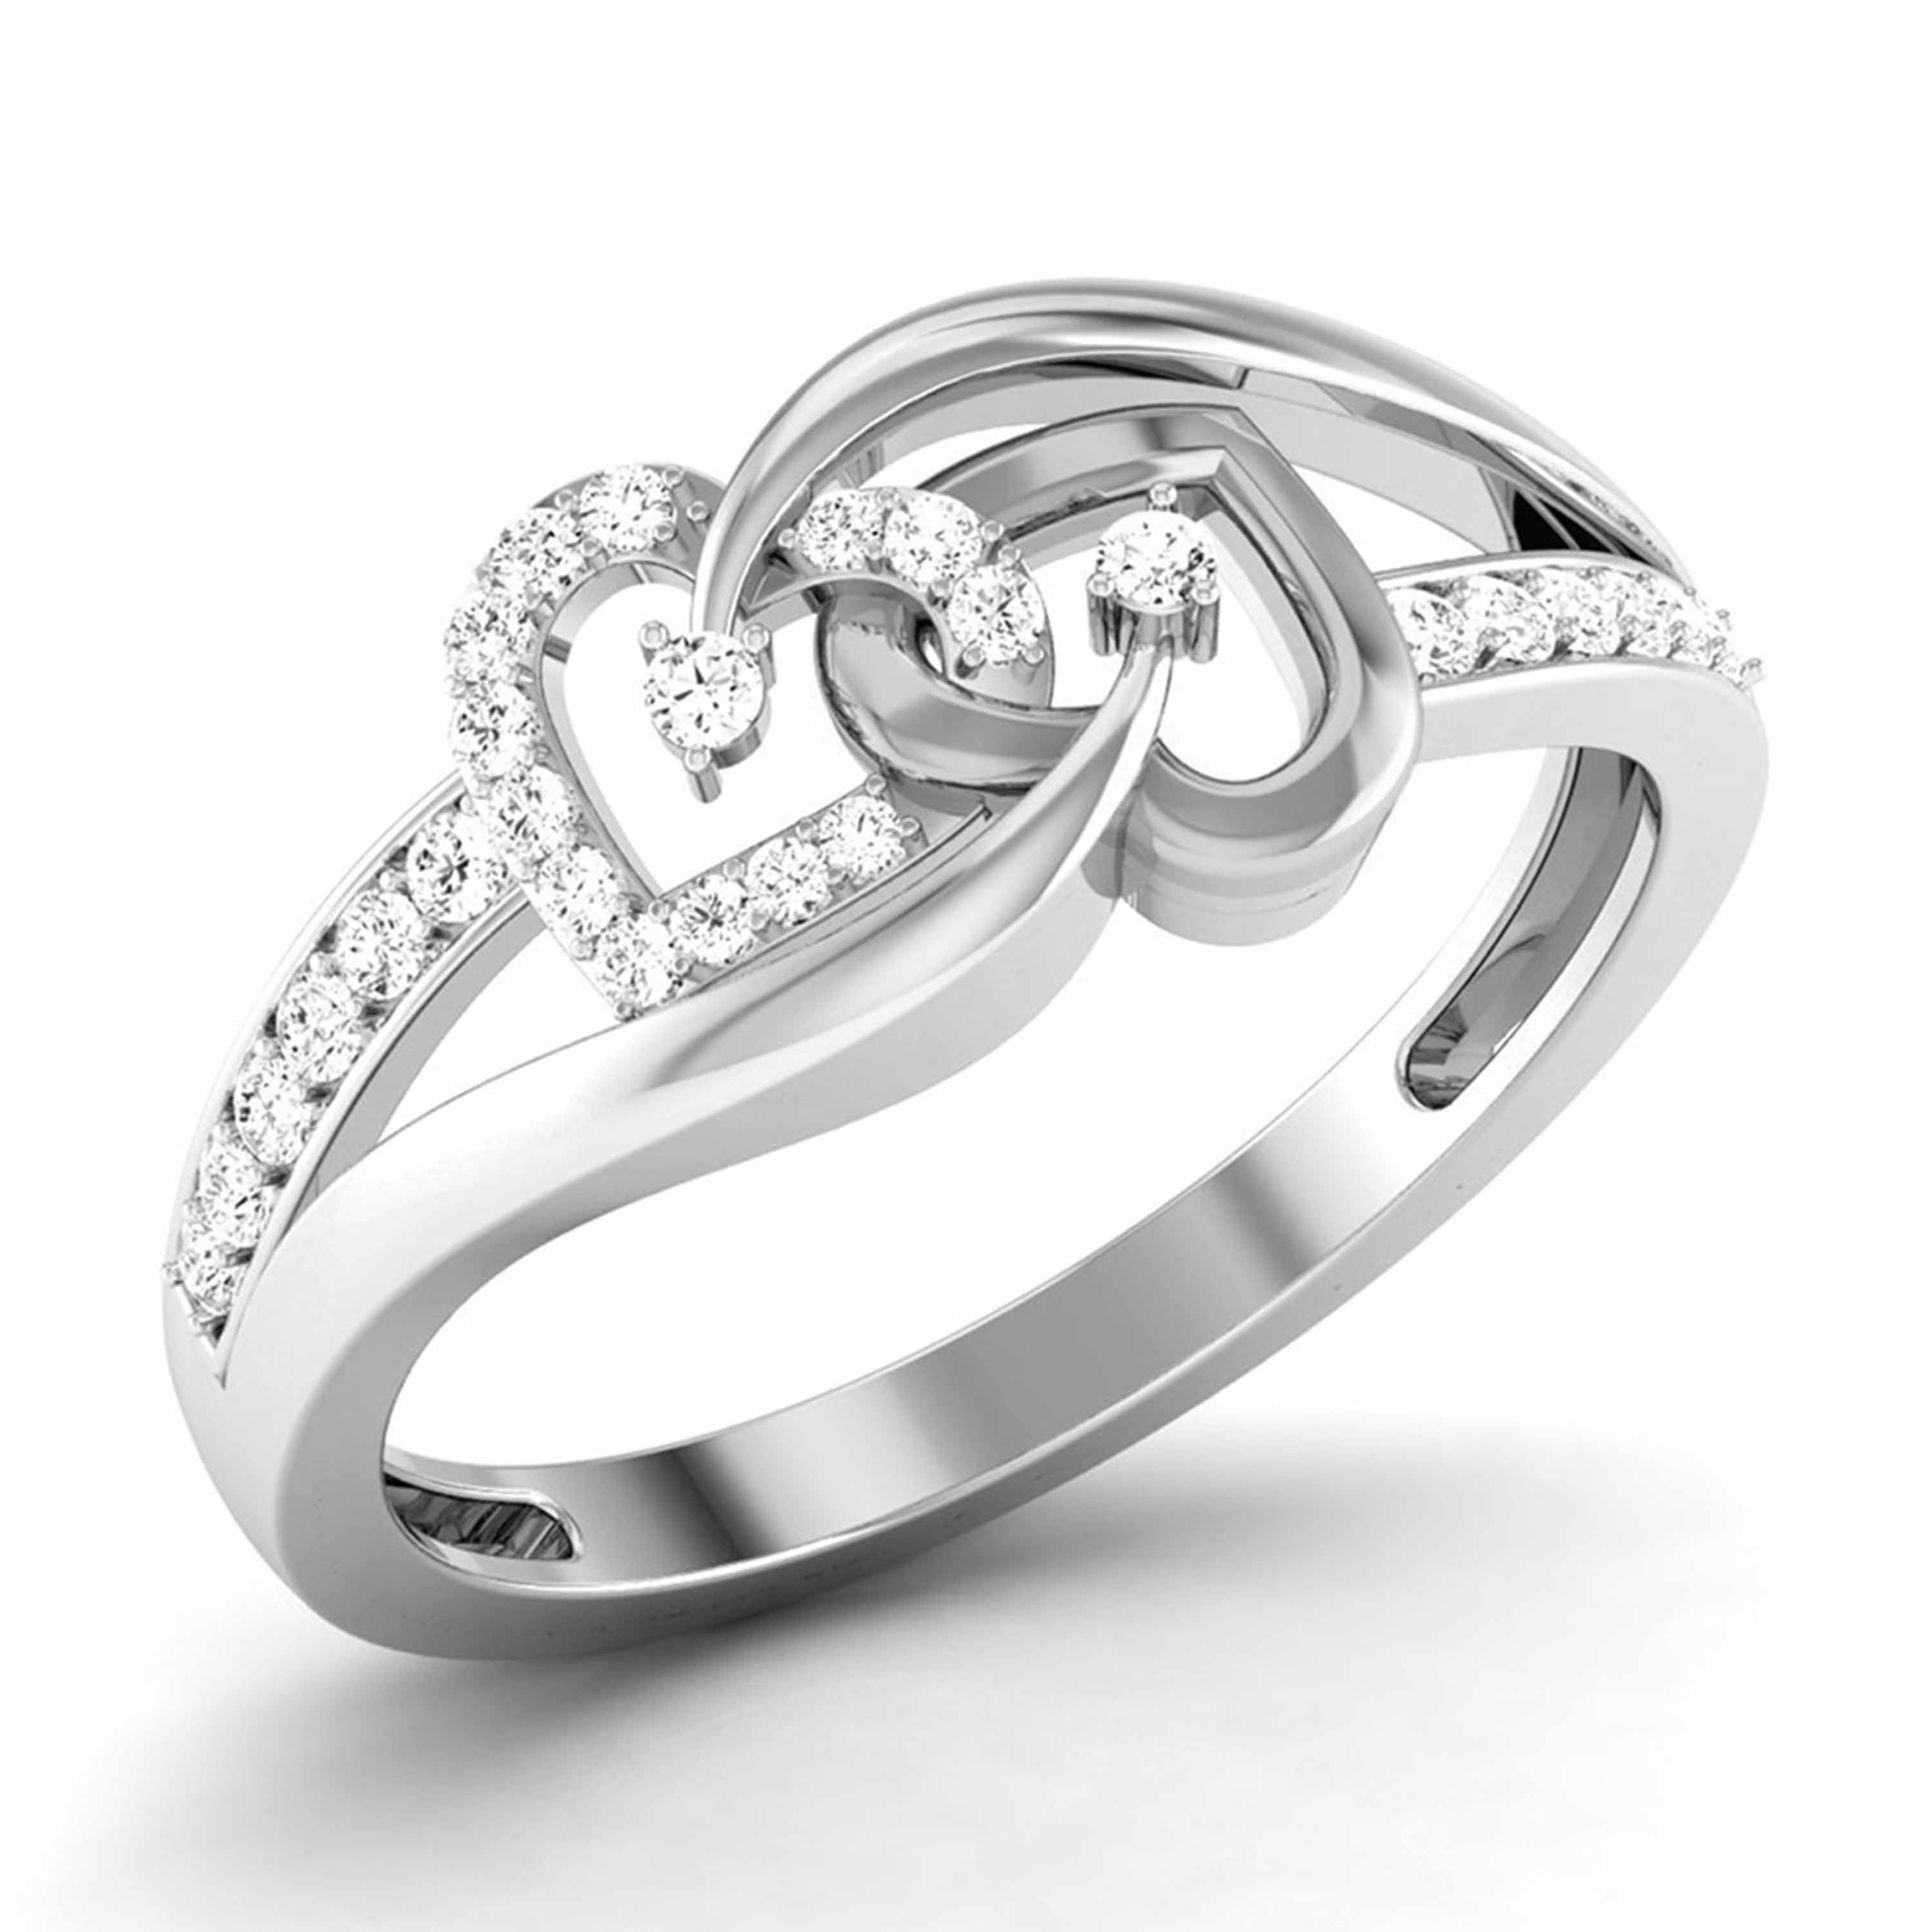 Buy S925 Sterling Silver CZ Ring high-end Cute Small Comfortable Heart- Shaped Simulation Diamond Ring Fashion Women Wedding or Engagement Ring (6)  at Amazon.in